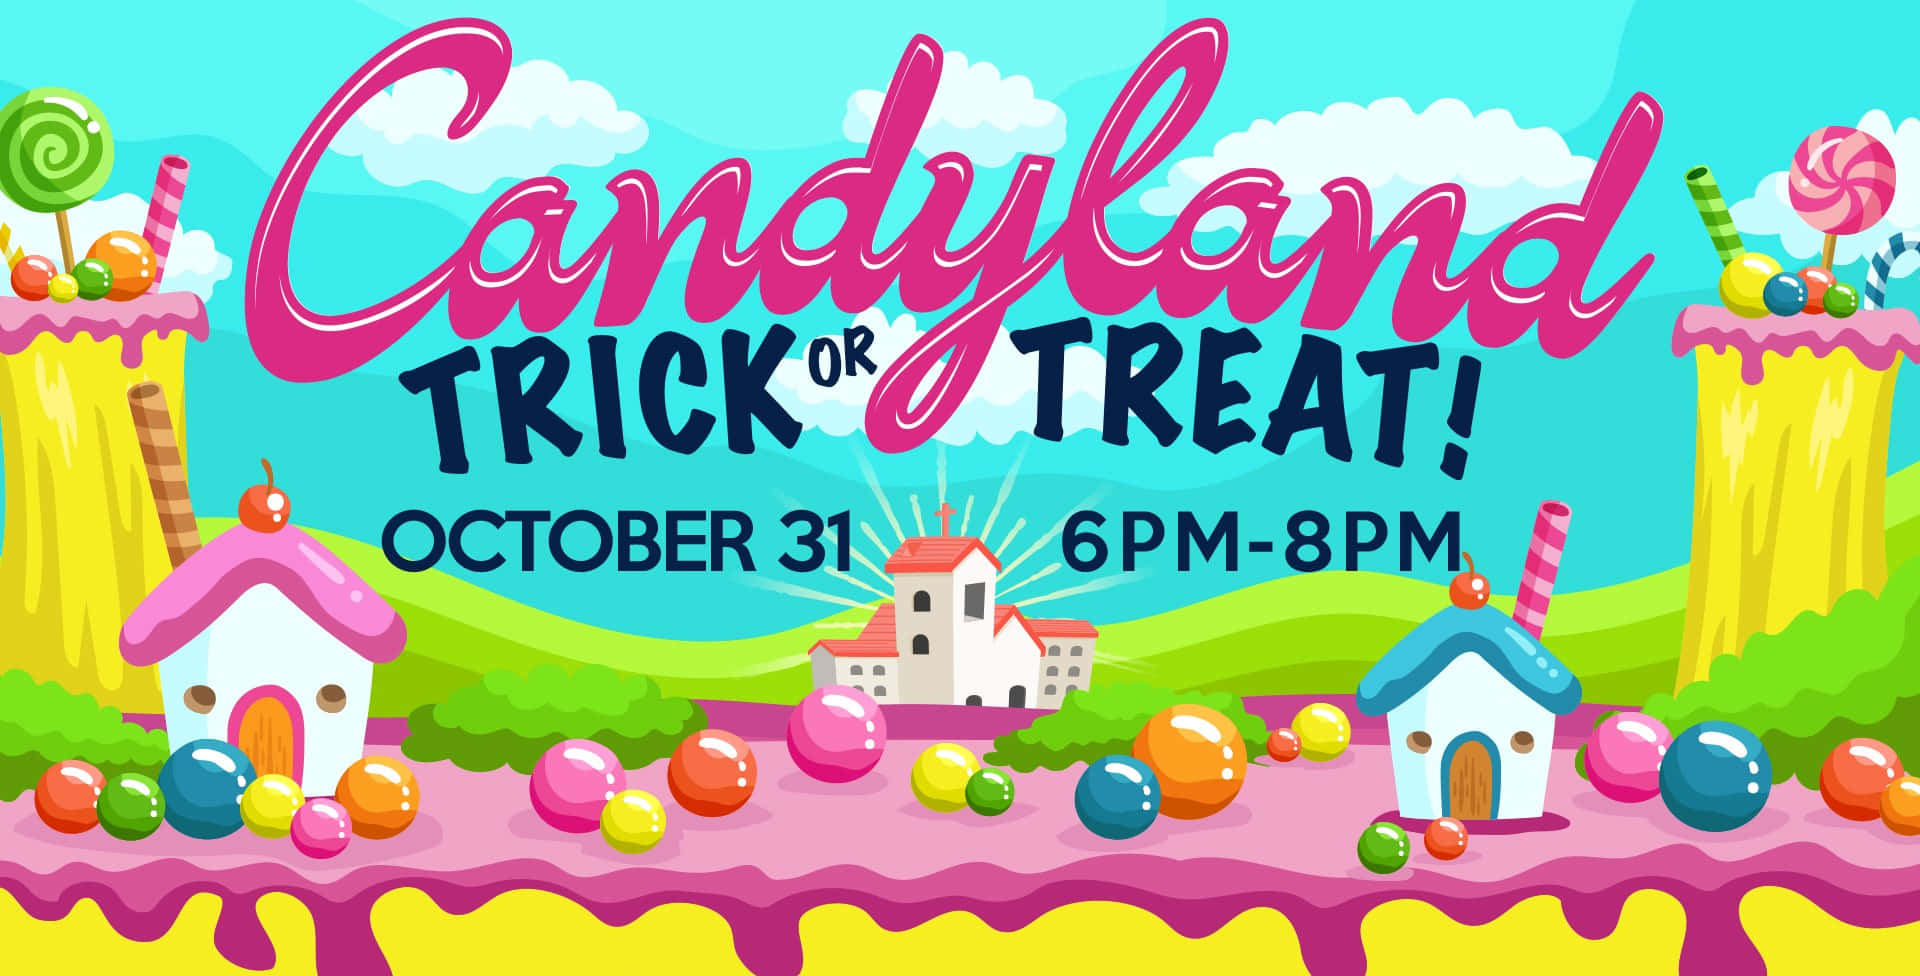 Candylandtrick Or Treat Can Be Translated To 